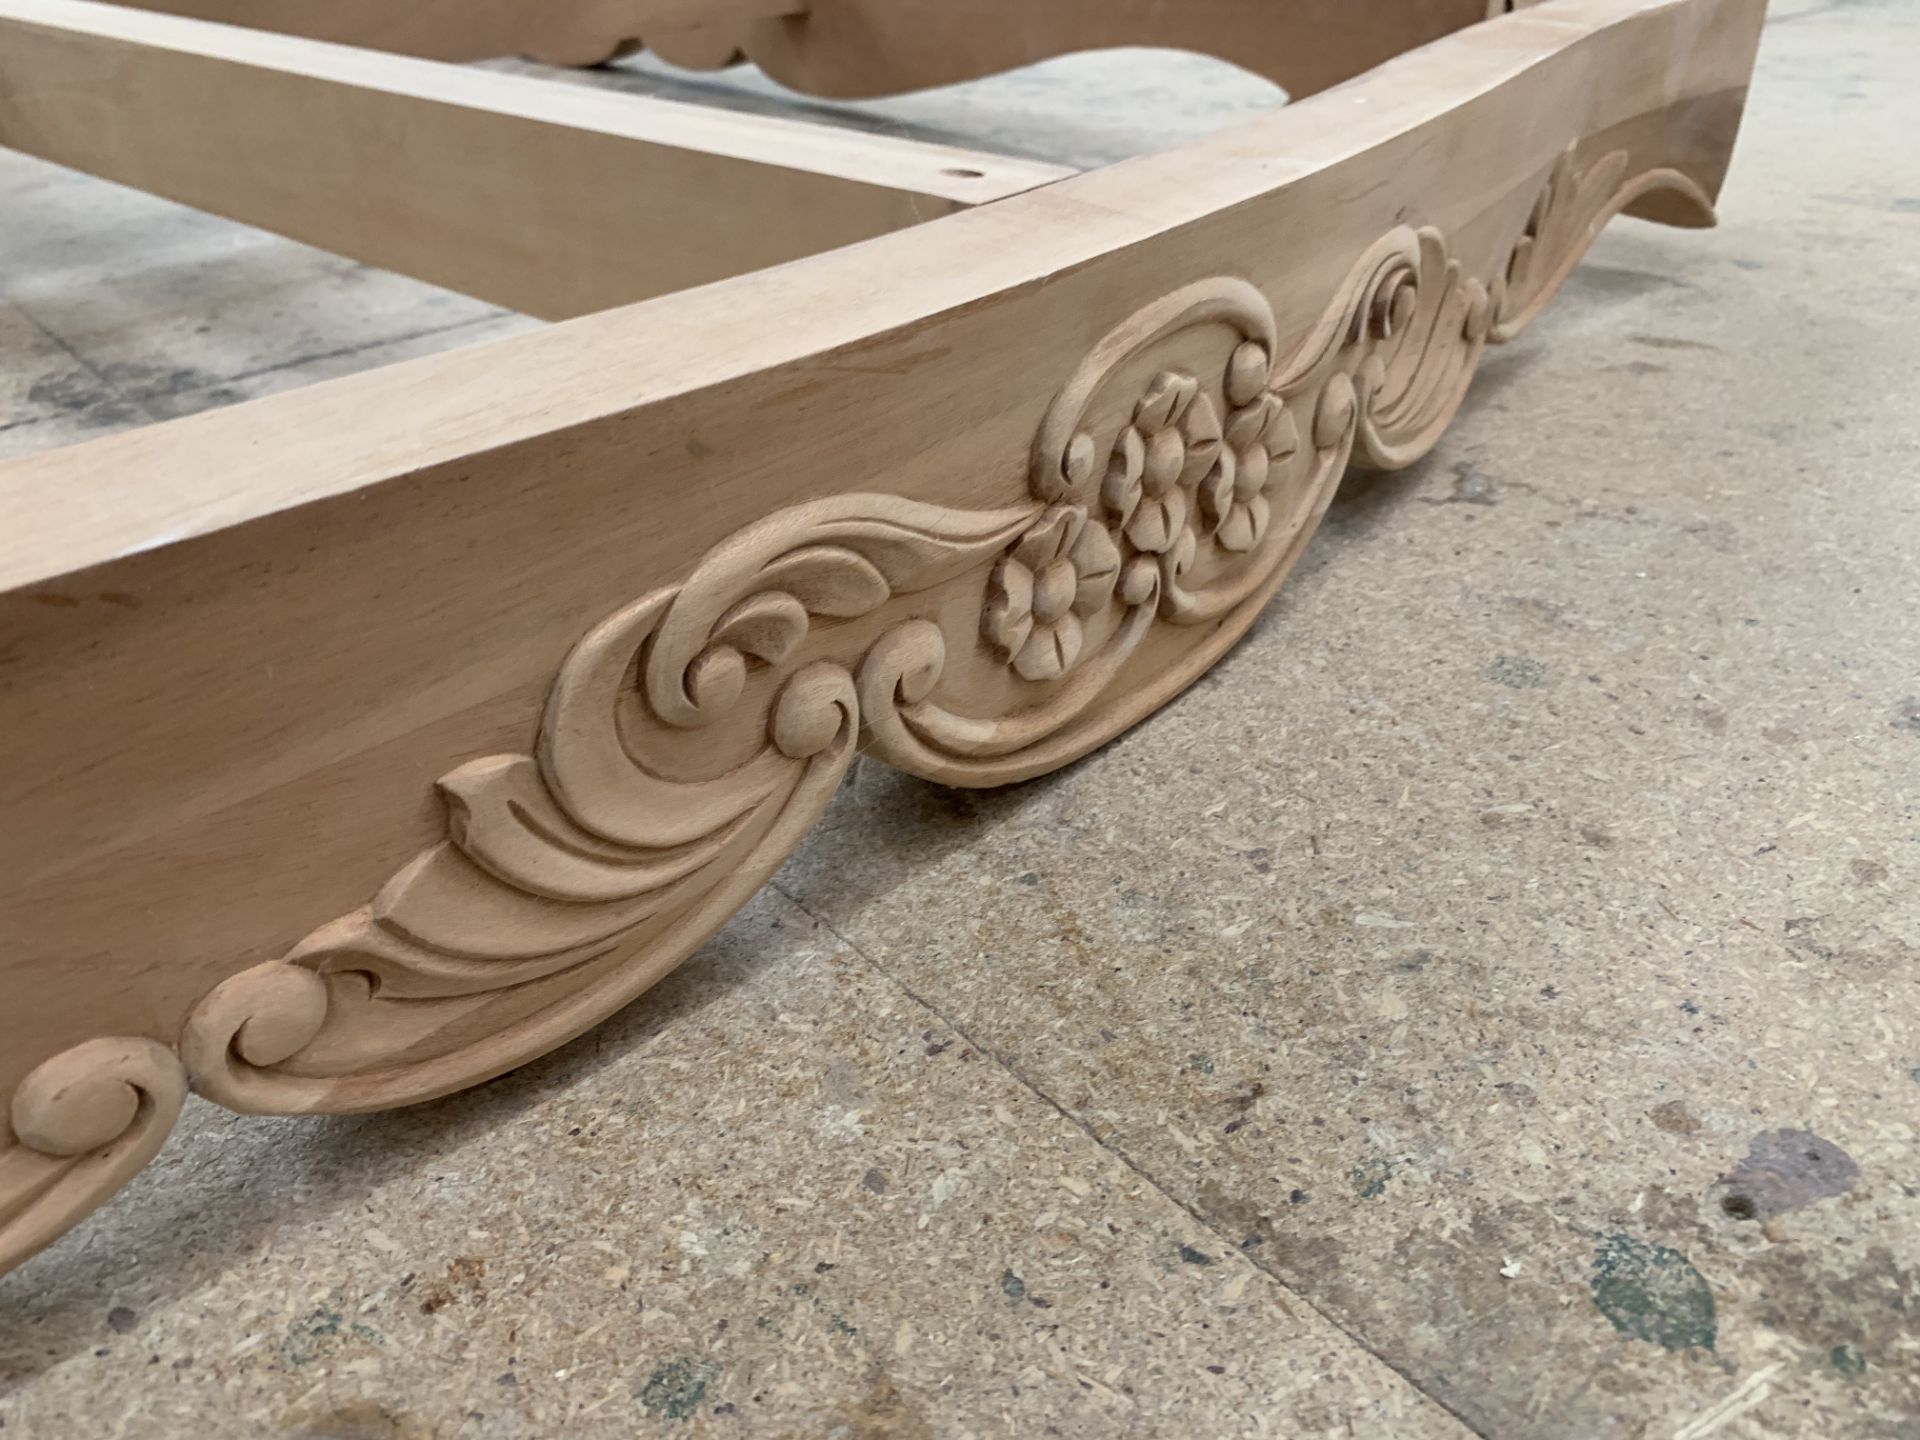 Large decorative carved Coffee Table Frame and Legs, approx 6' x 4', requires finishing/polishing ( - Image 4 of 8